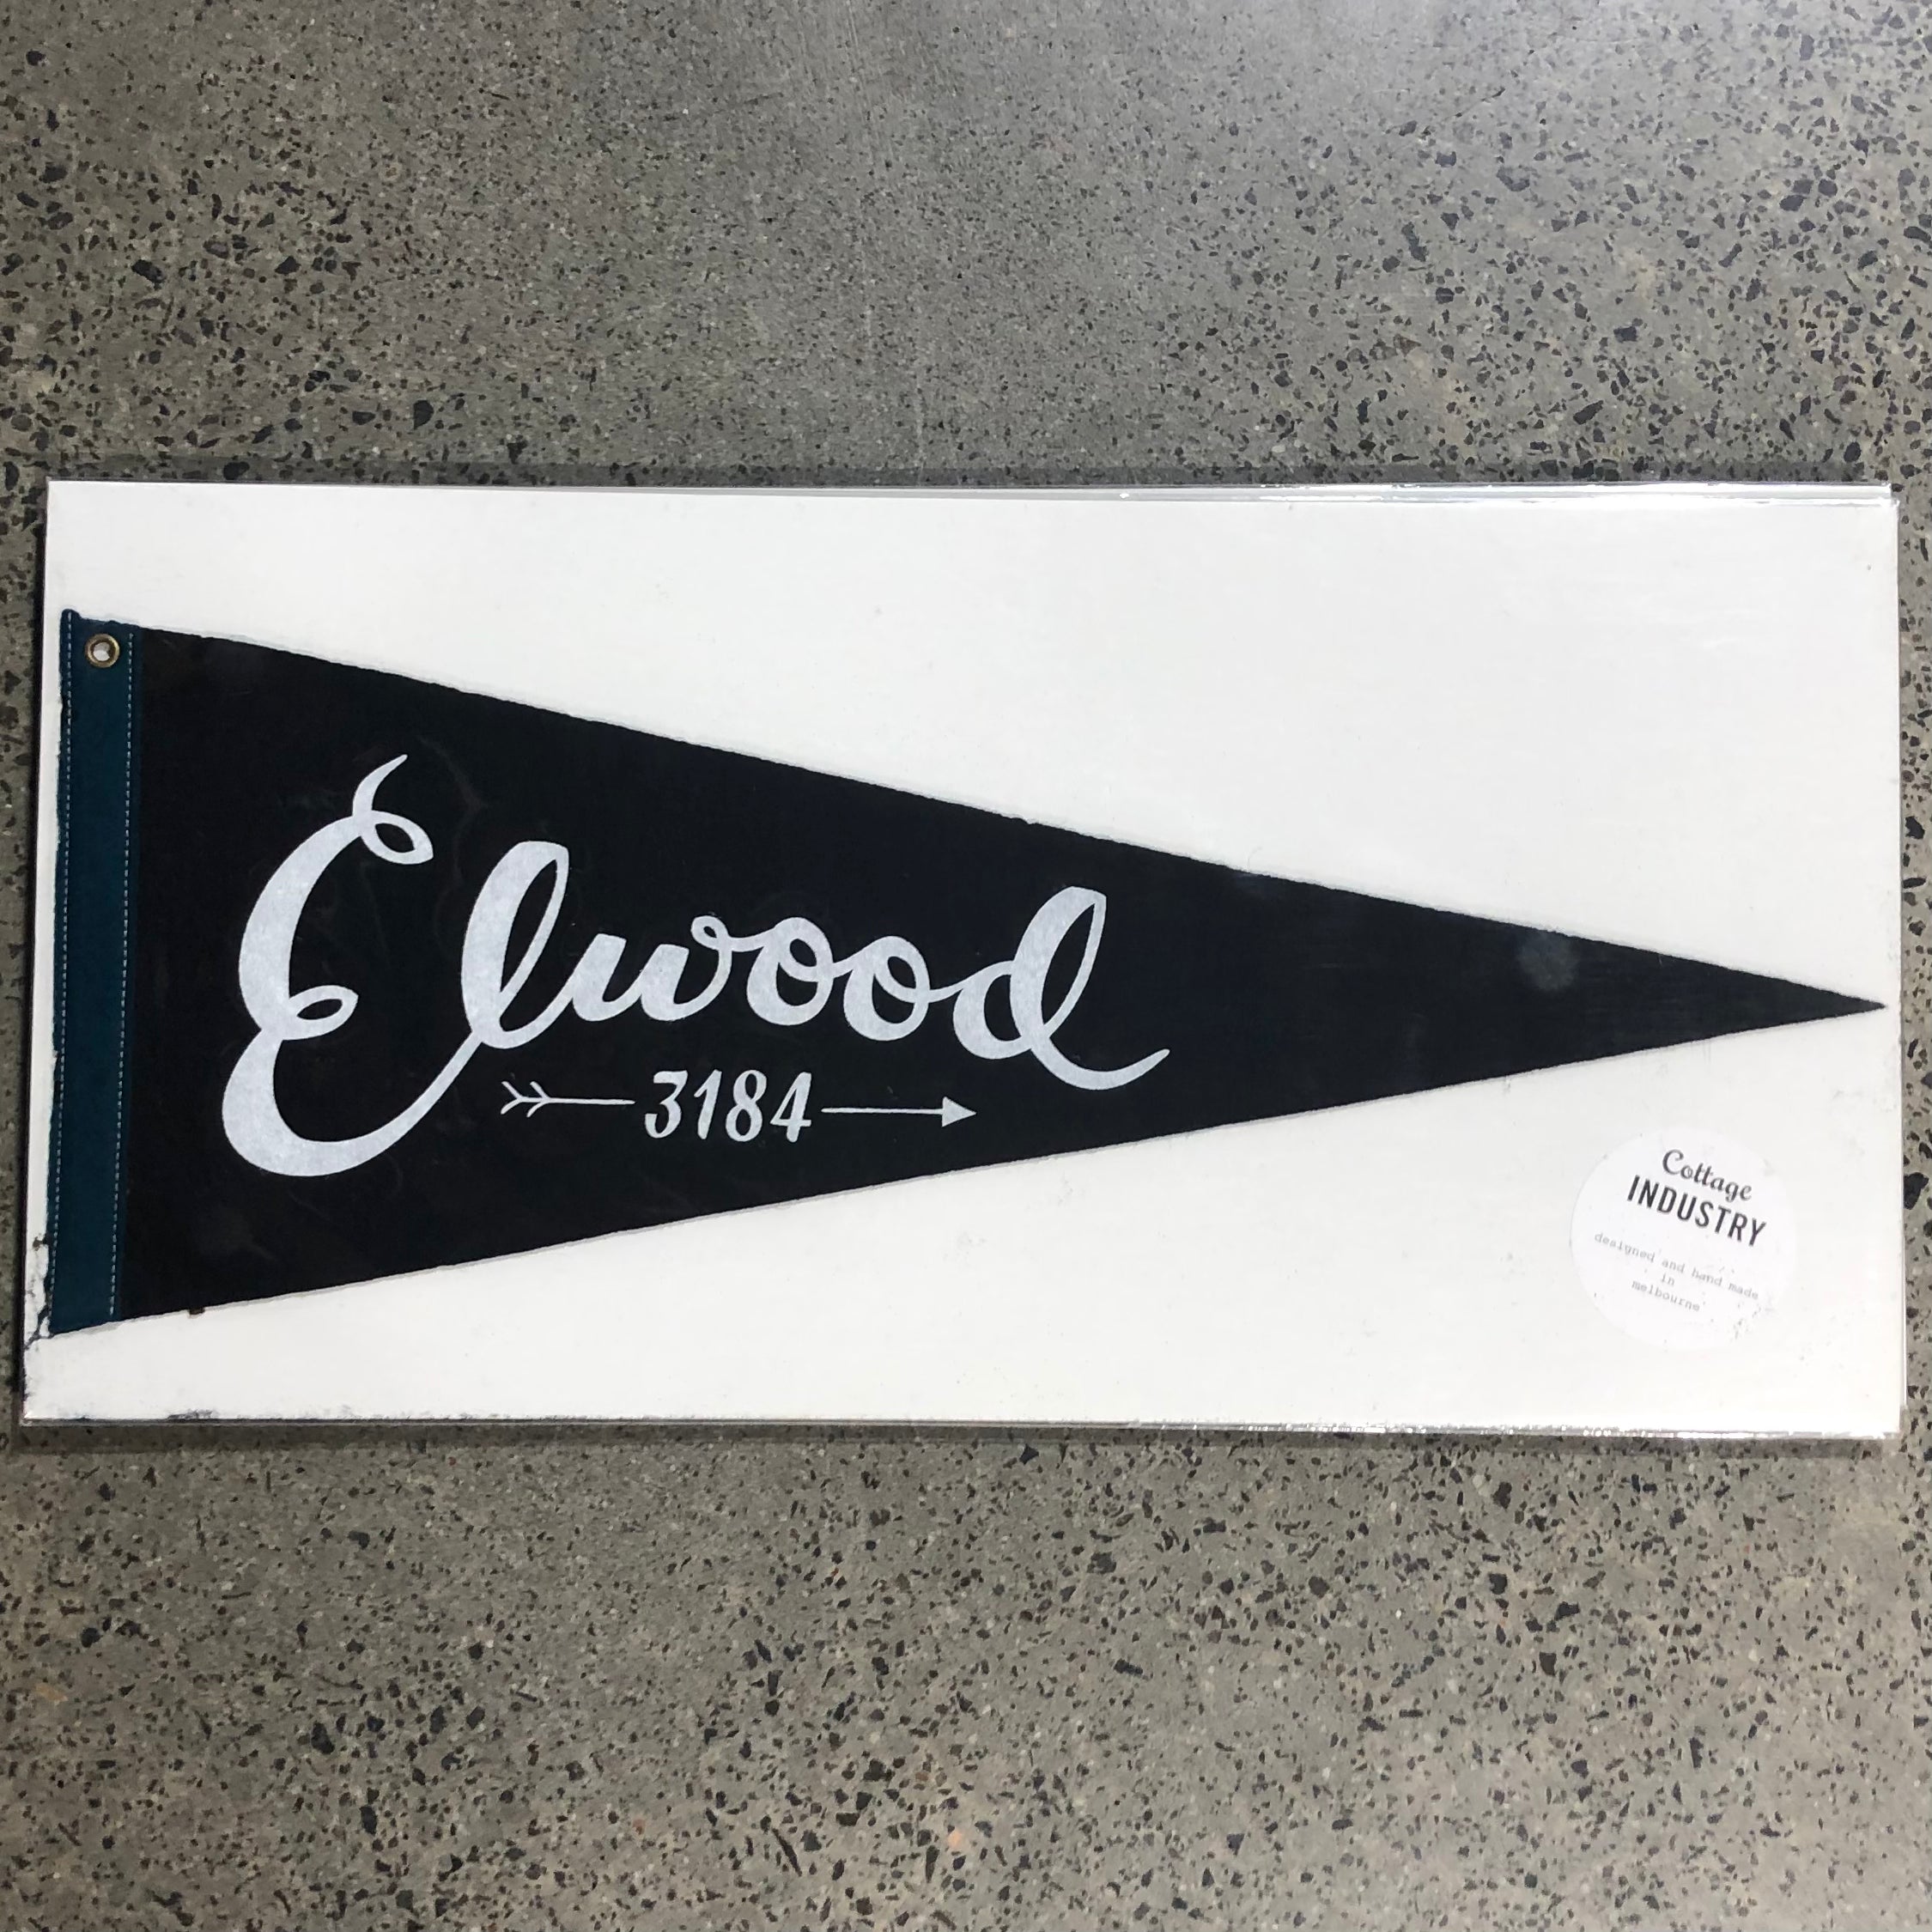 Pennant Elwood in Black and Teal